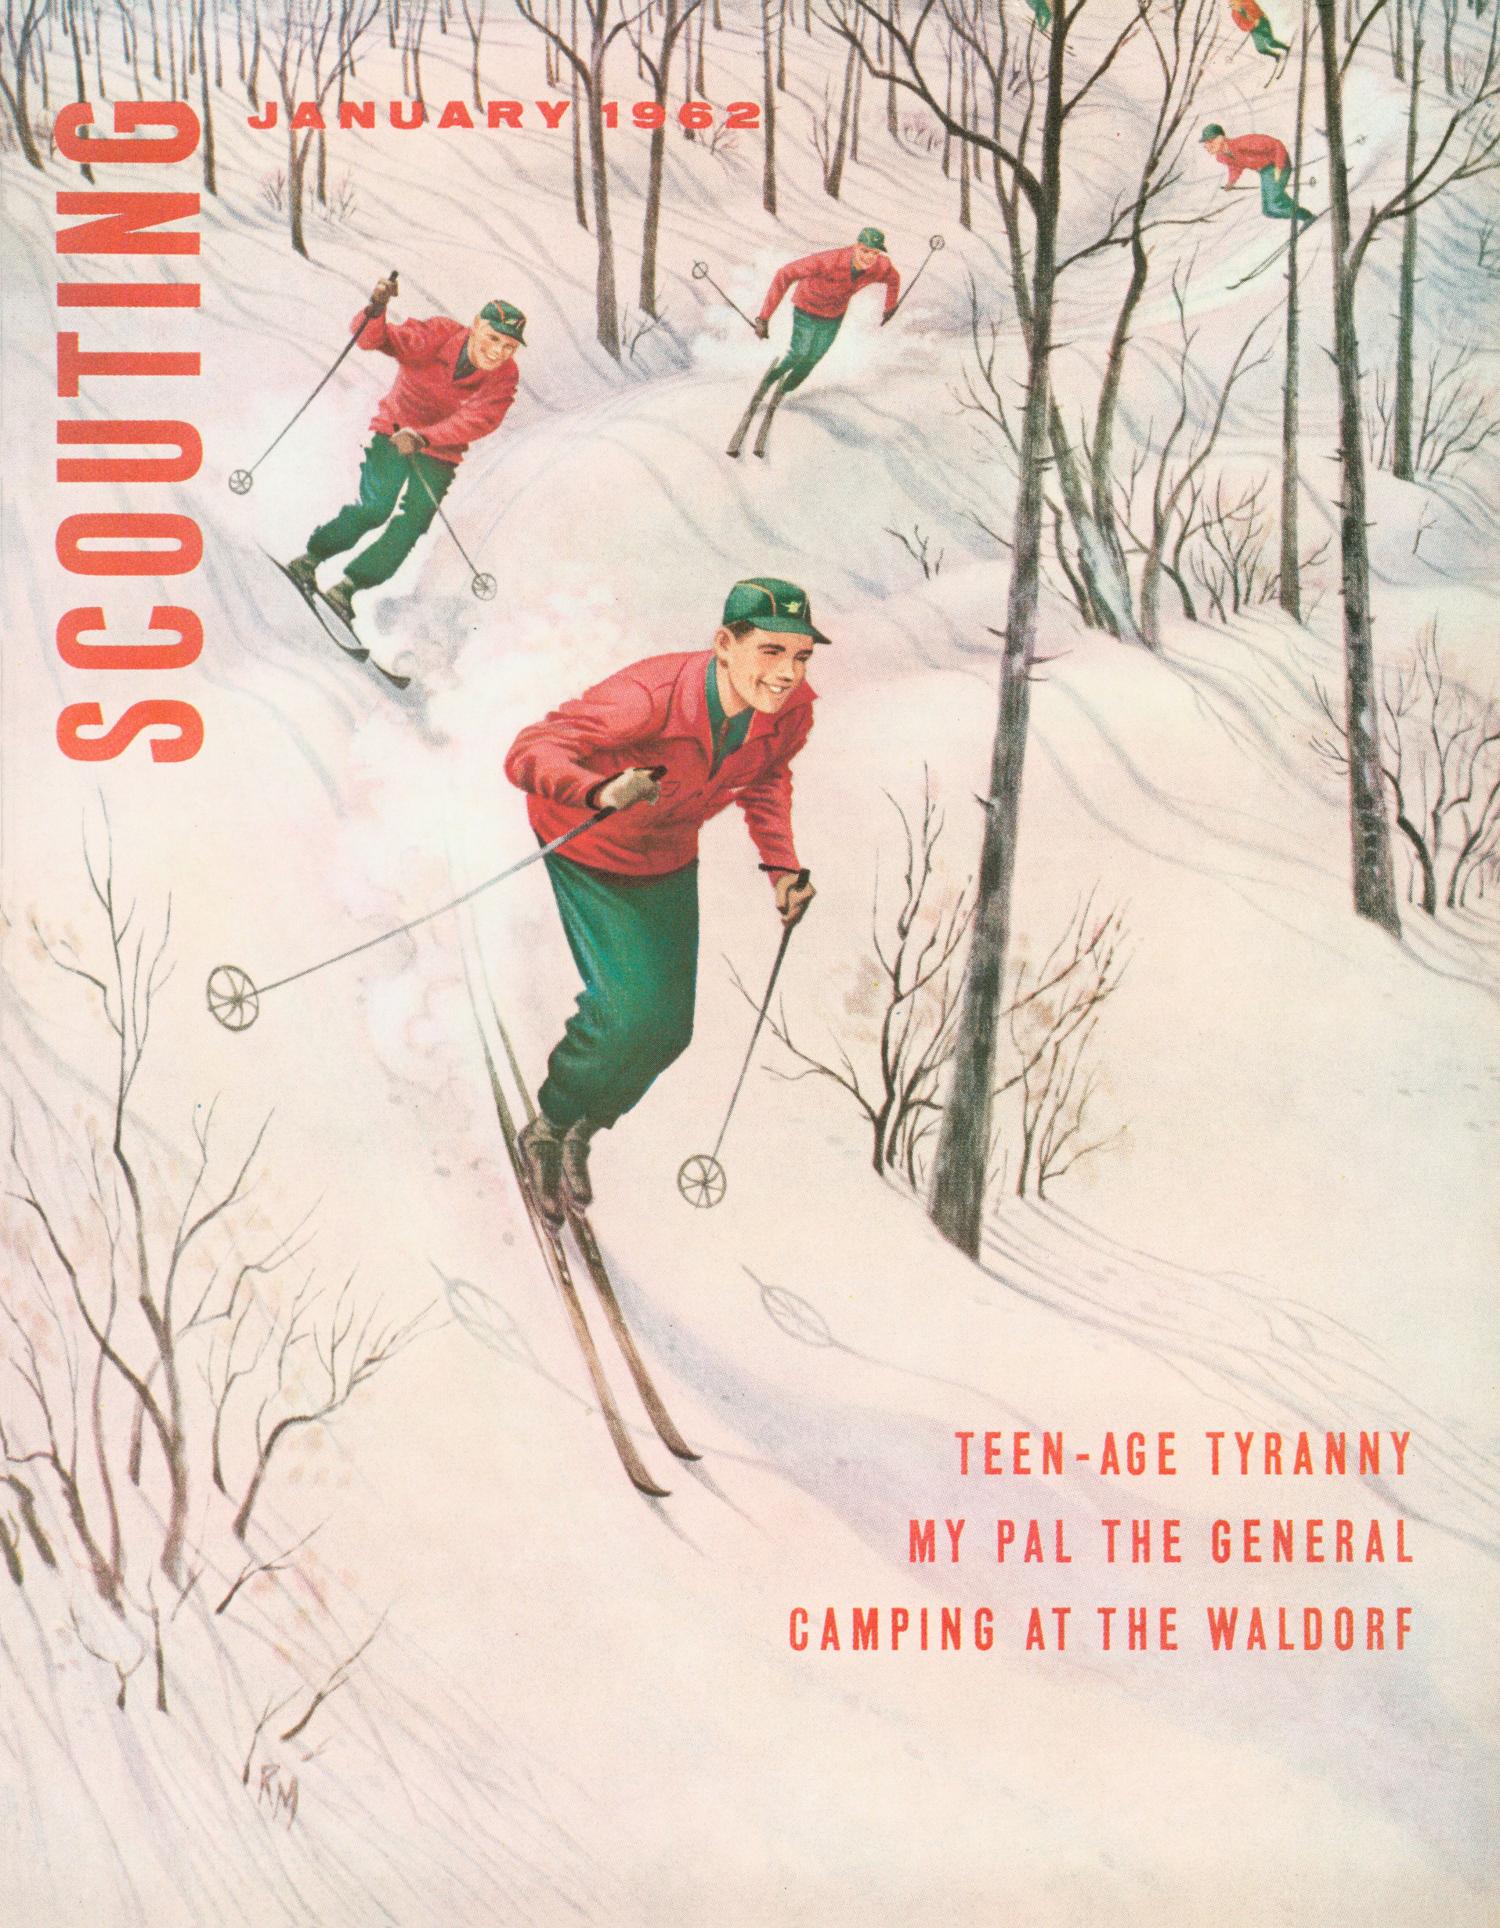 Scouting, Volume 50, Number 1, January 1962
                                                
                                                    Front Cover
                                                